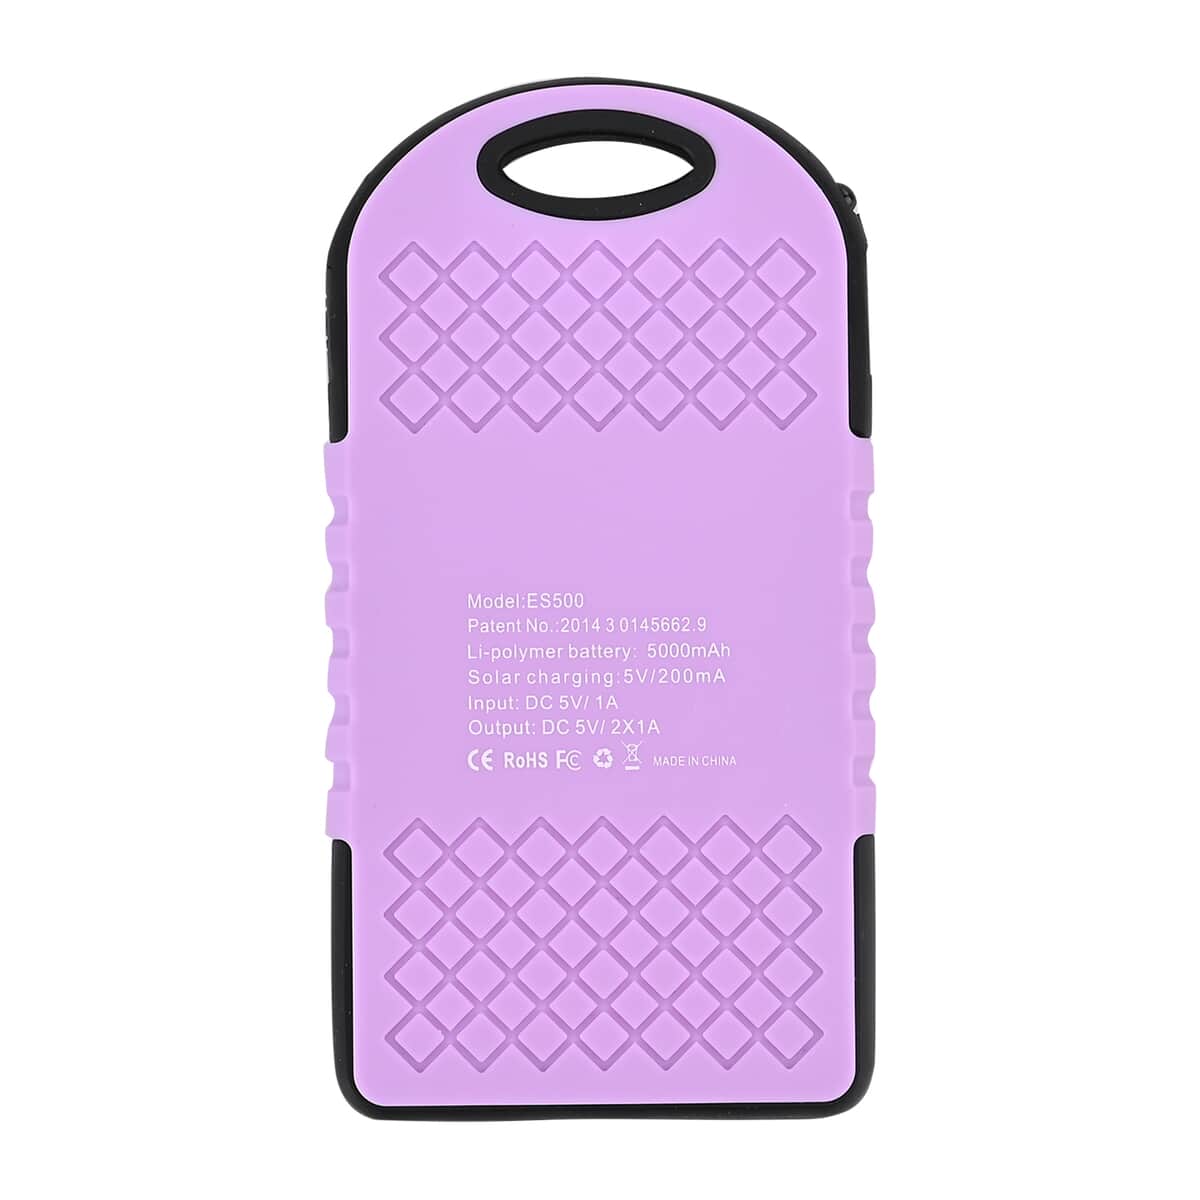 Homesmart Purple Carabiner Solar 5000 mAh Battery Charger with USB & Emergency LED Torch image number 3